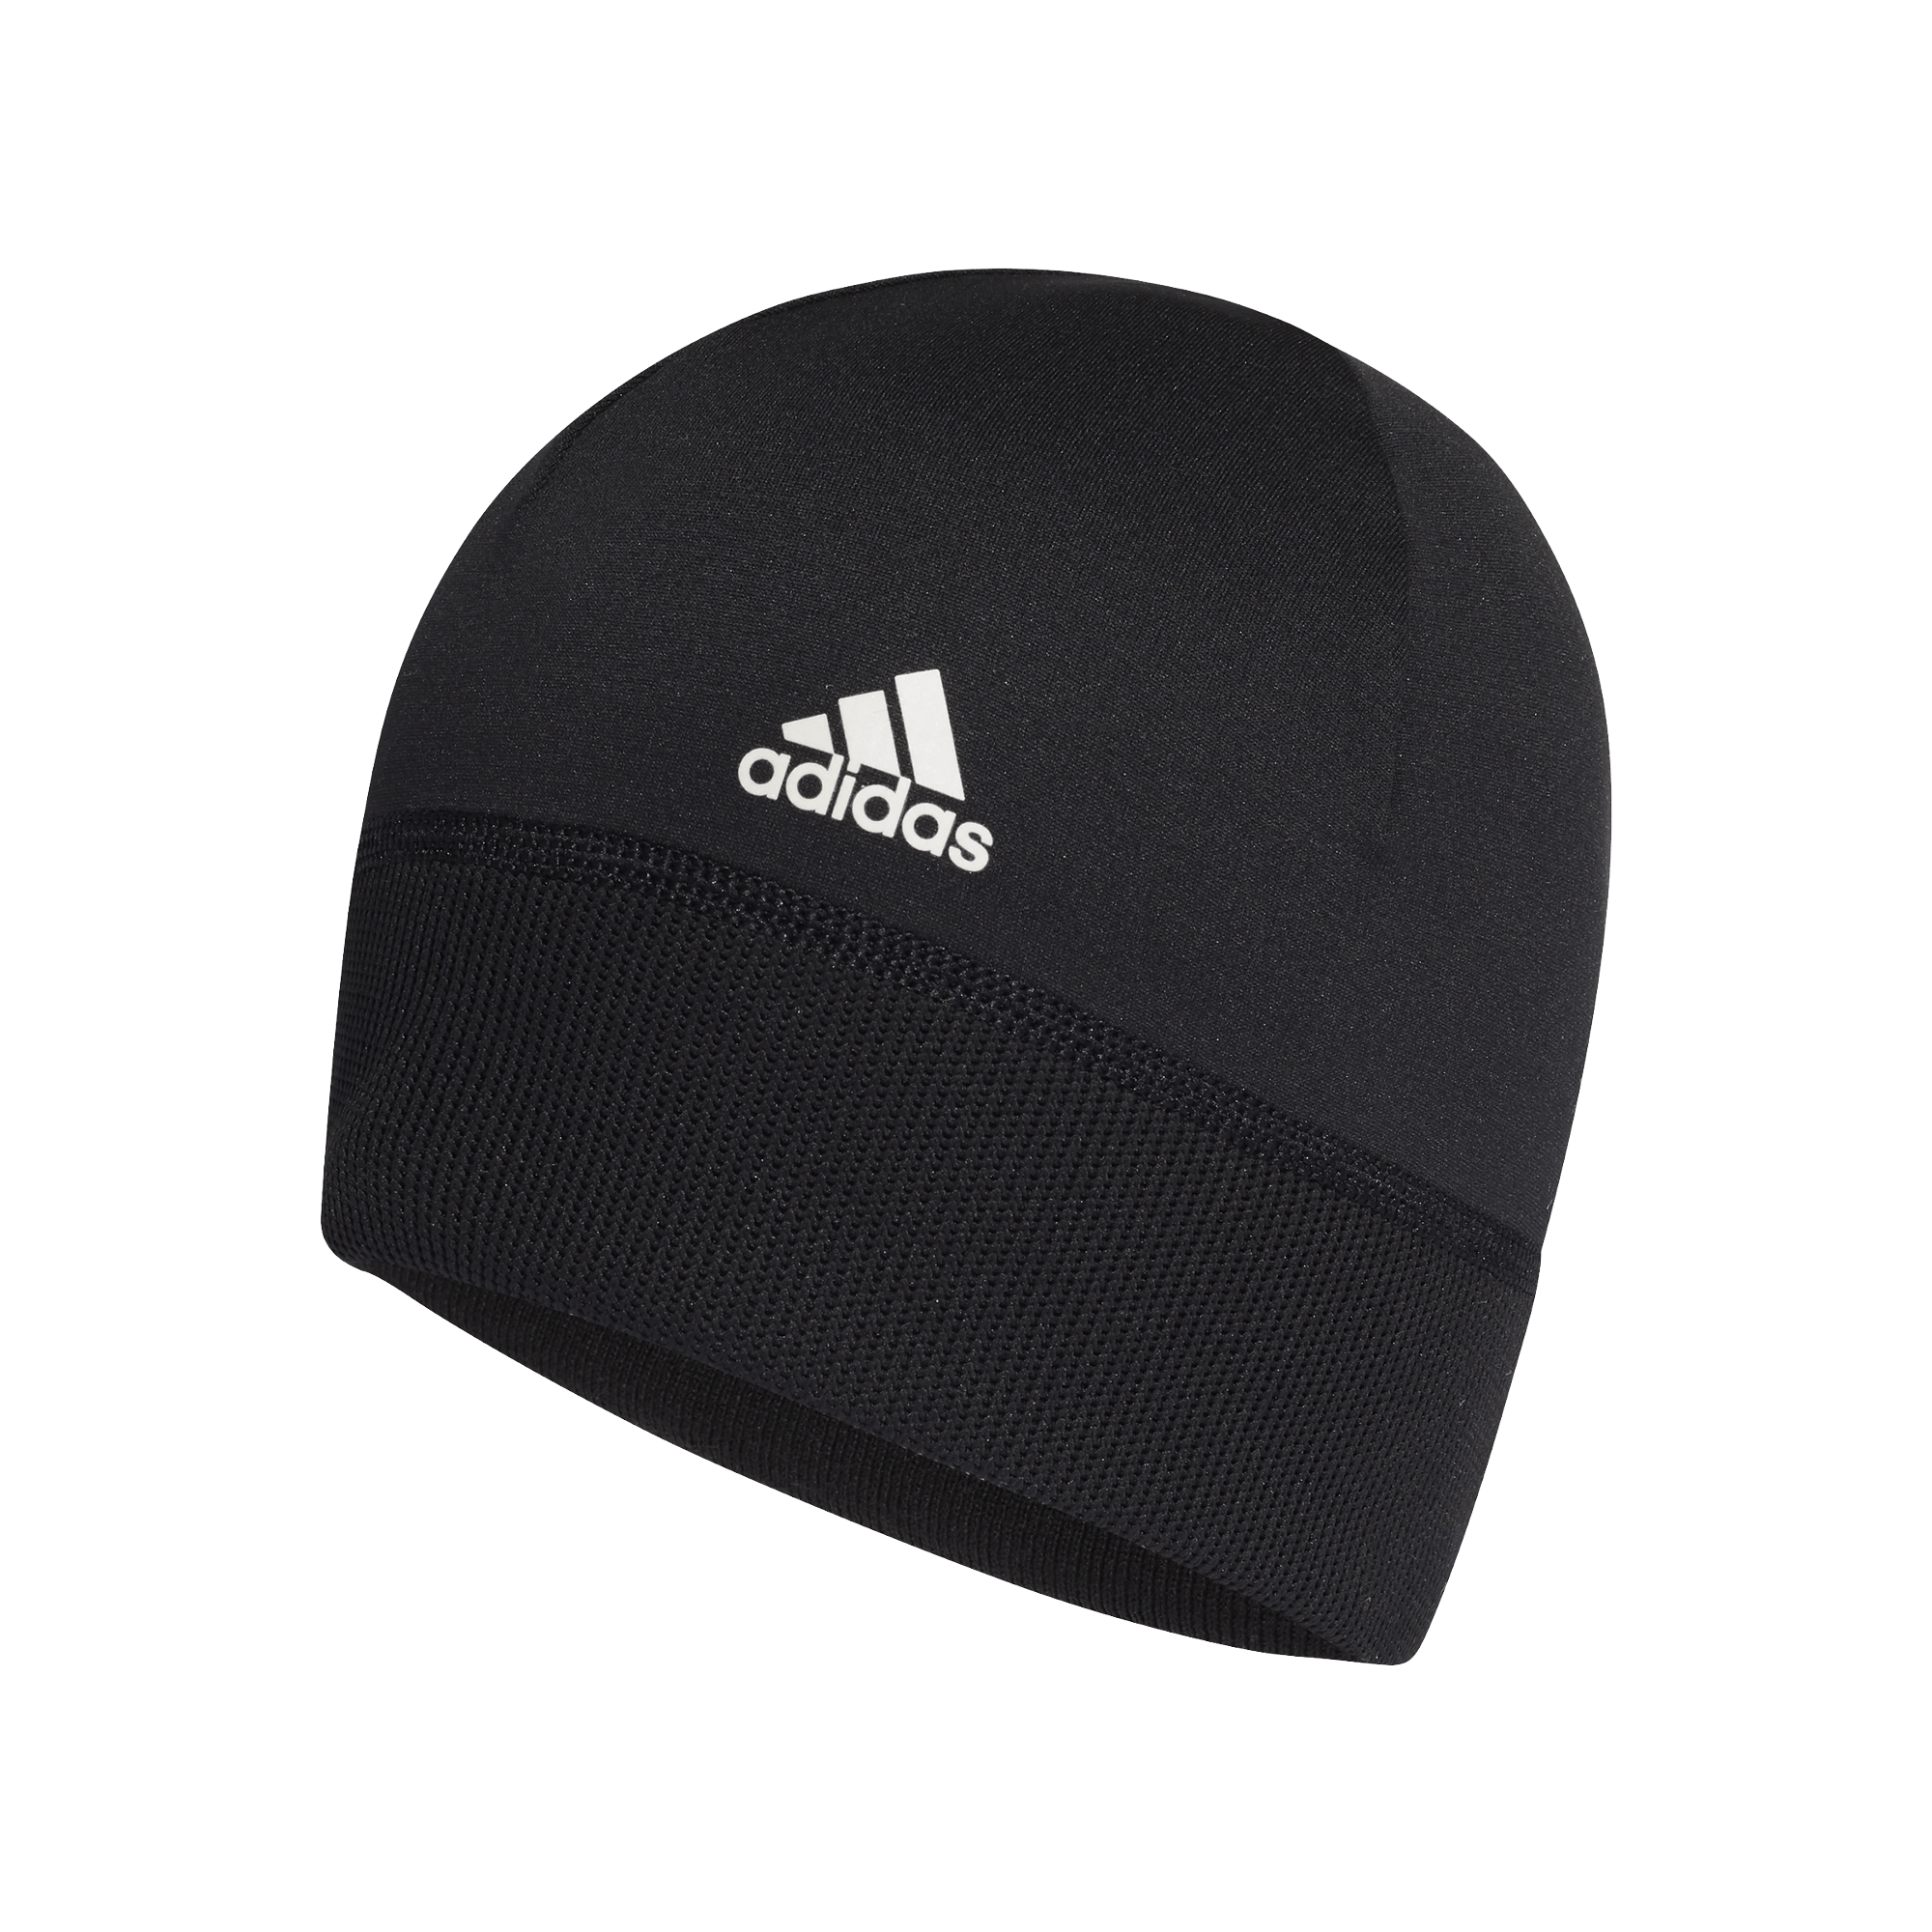 All Blacks Rugby Rugby Zealand | - Beanie World New Wicking 2021 Moisture by Beanie Rugby Polyester Shop Adidas